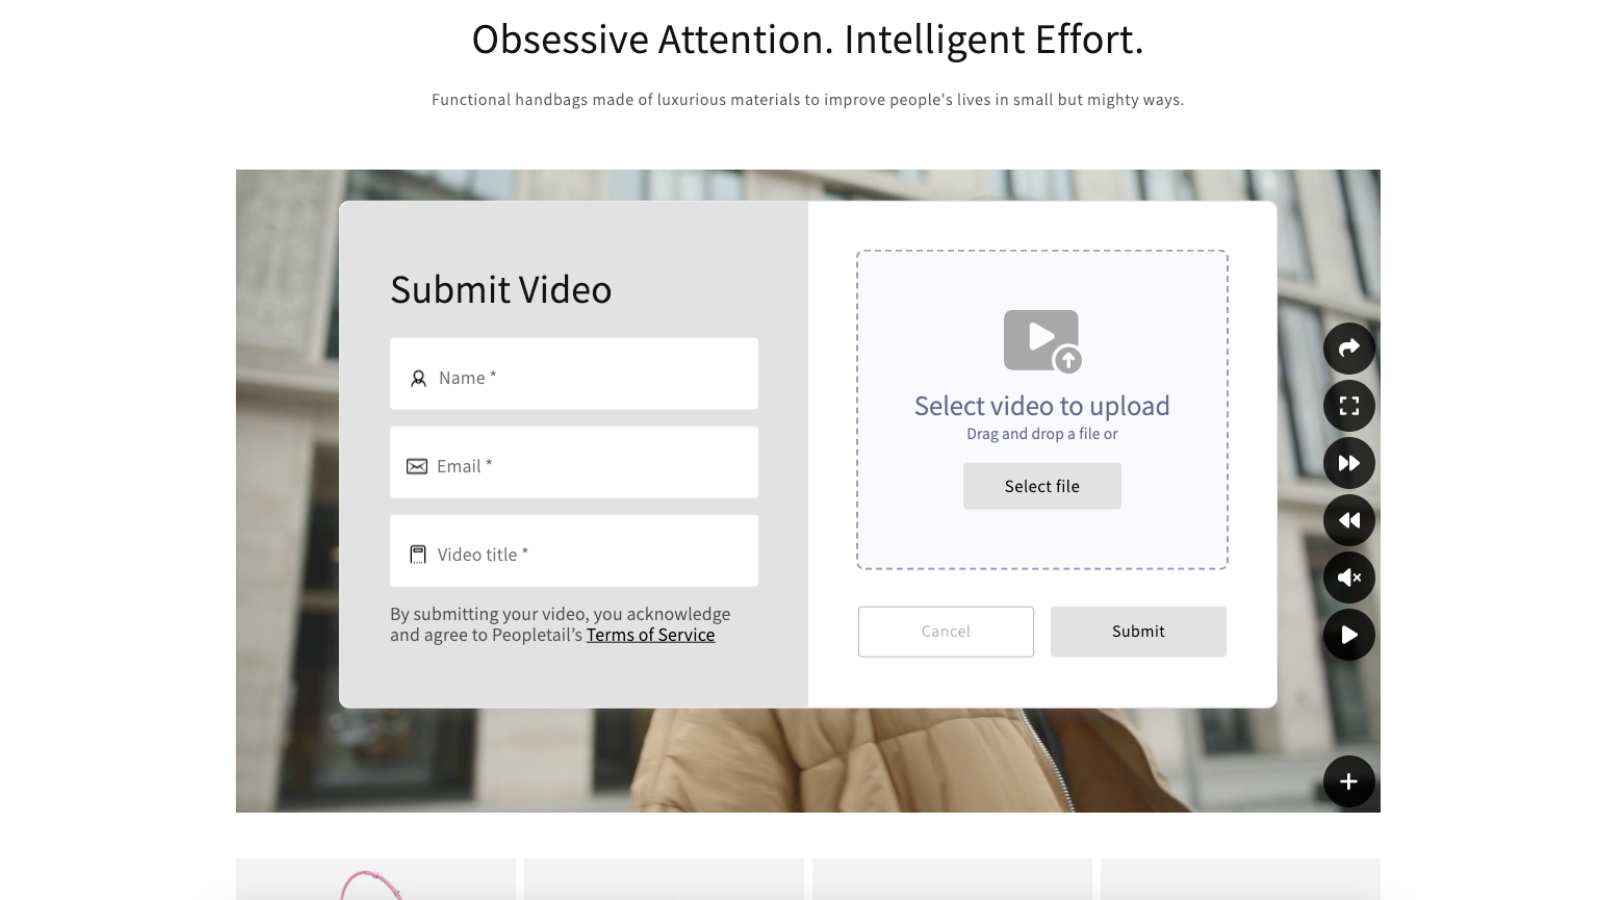 Consumers can submit videos for your approval.